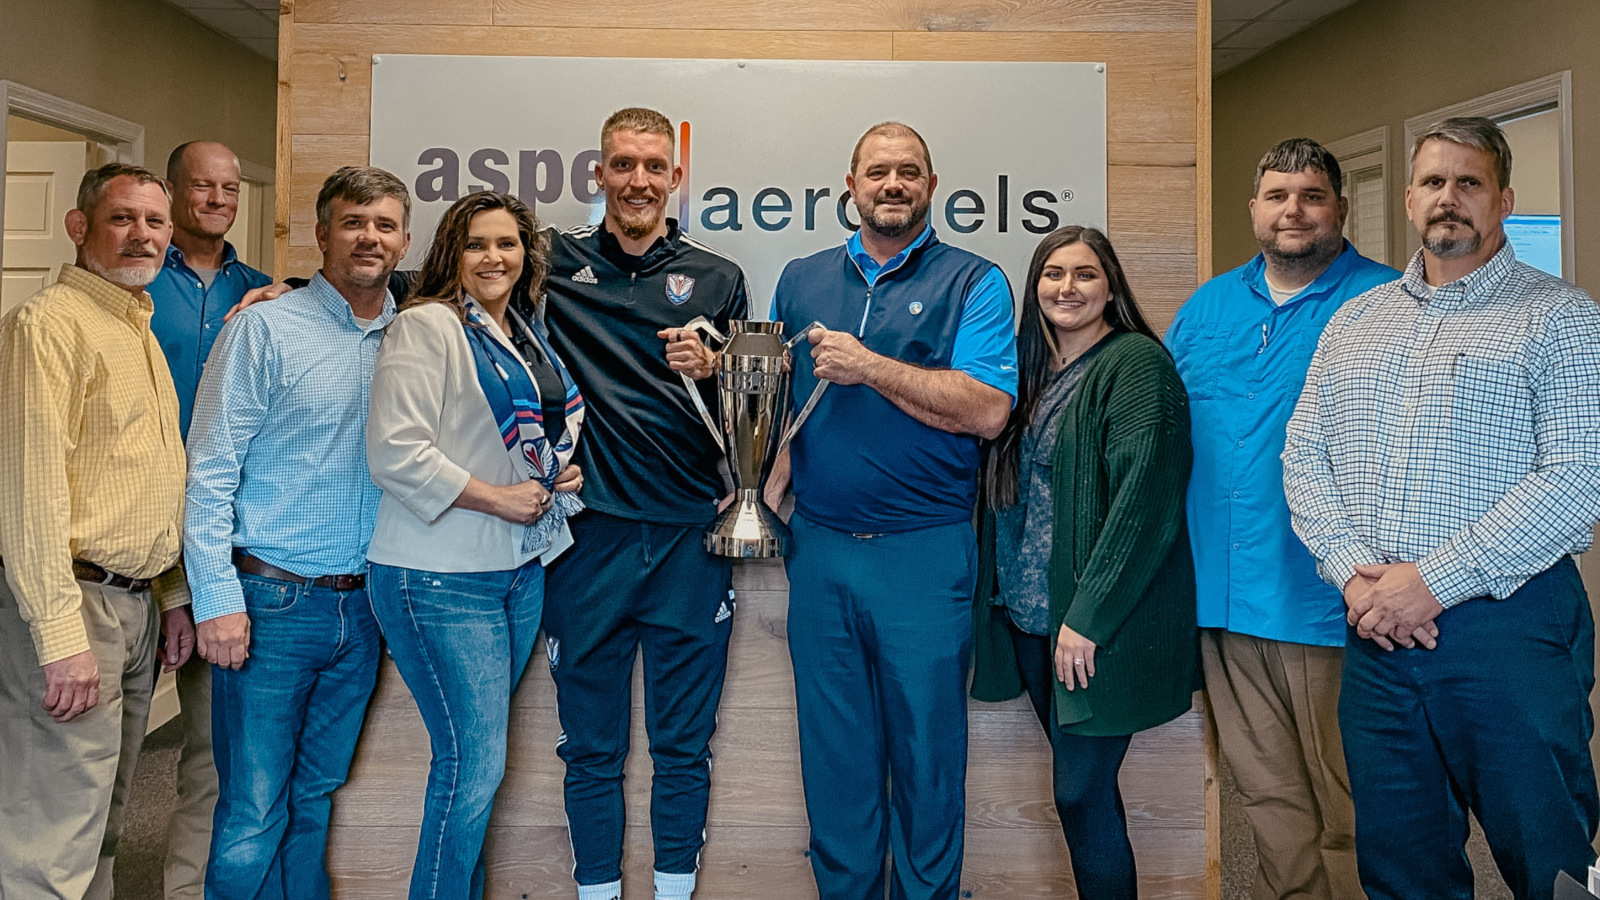 Aspen Aerogels, Tormenta FC Team Up to Support Soccer Dreams of Statesboro Girls featured image